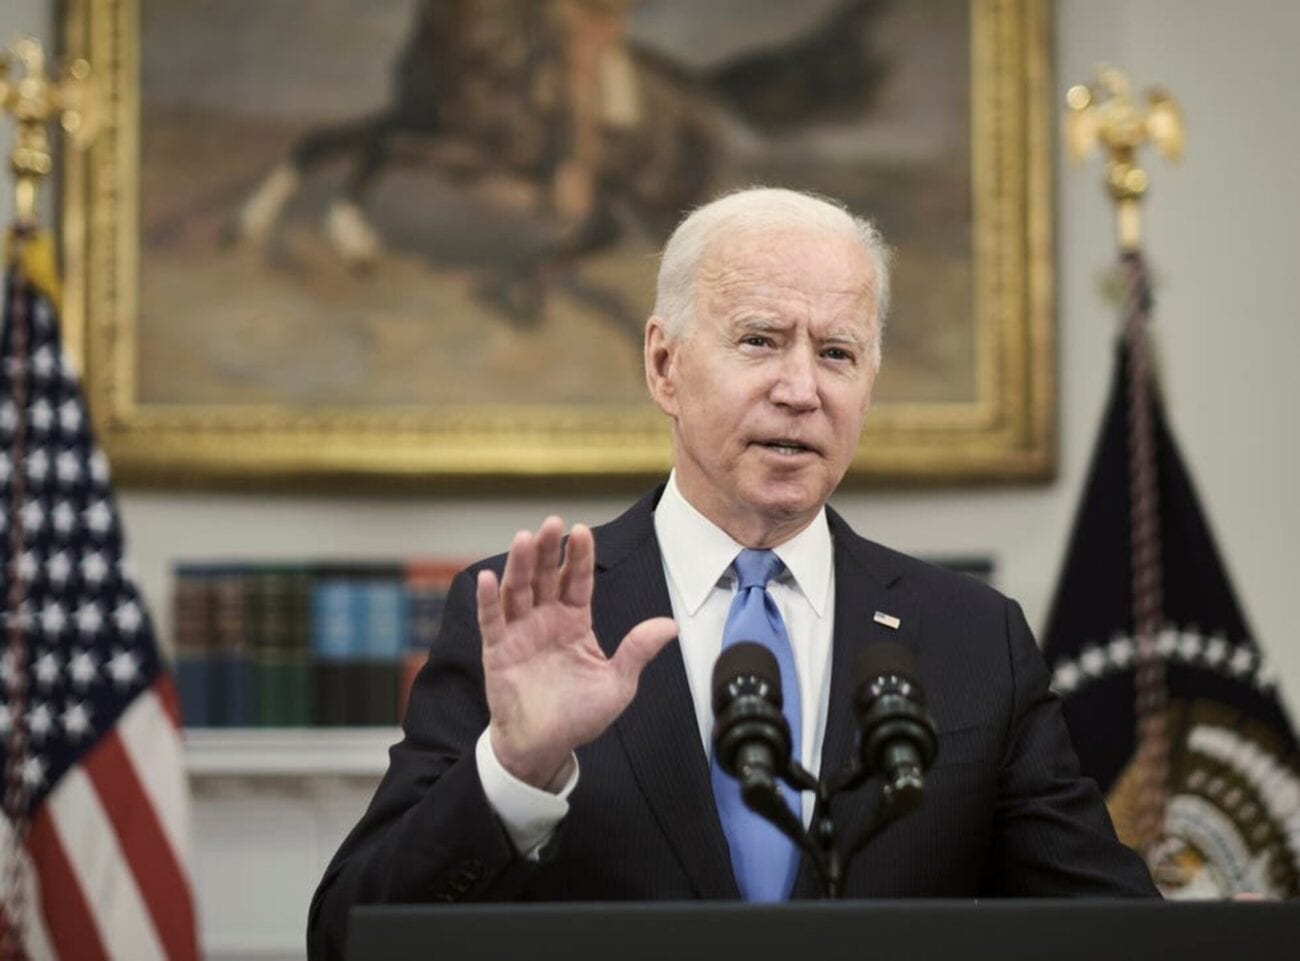 After the Venmo account of Joe Biden was discovered by the public, the company has been making changes on protecting your account. Find out here.